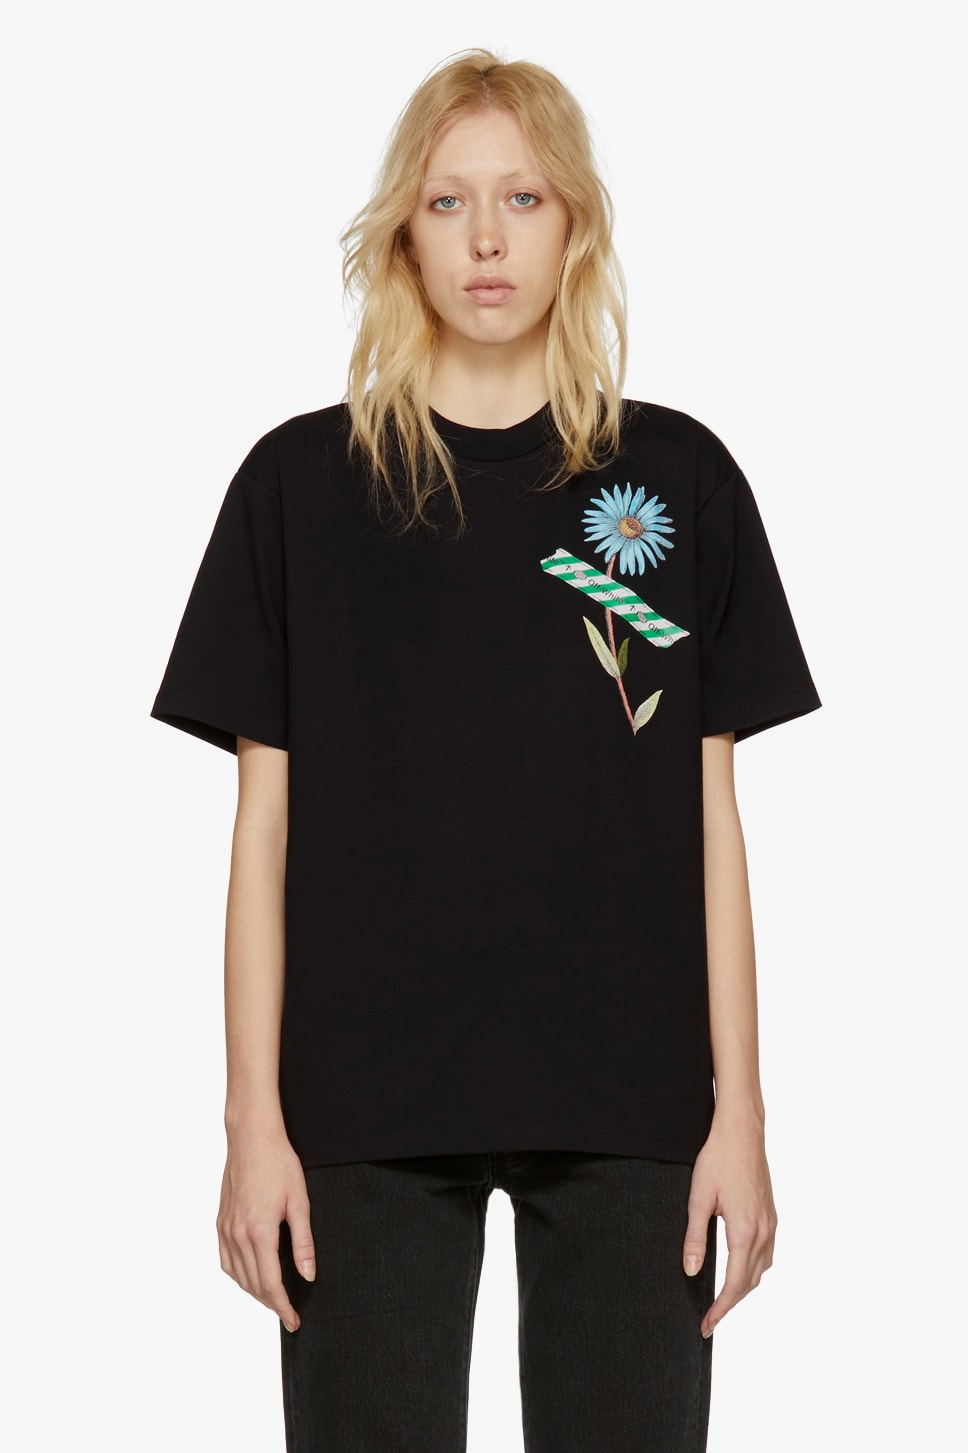 Off-White New Arrivals Spring Collection T-Shirt Flower Print